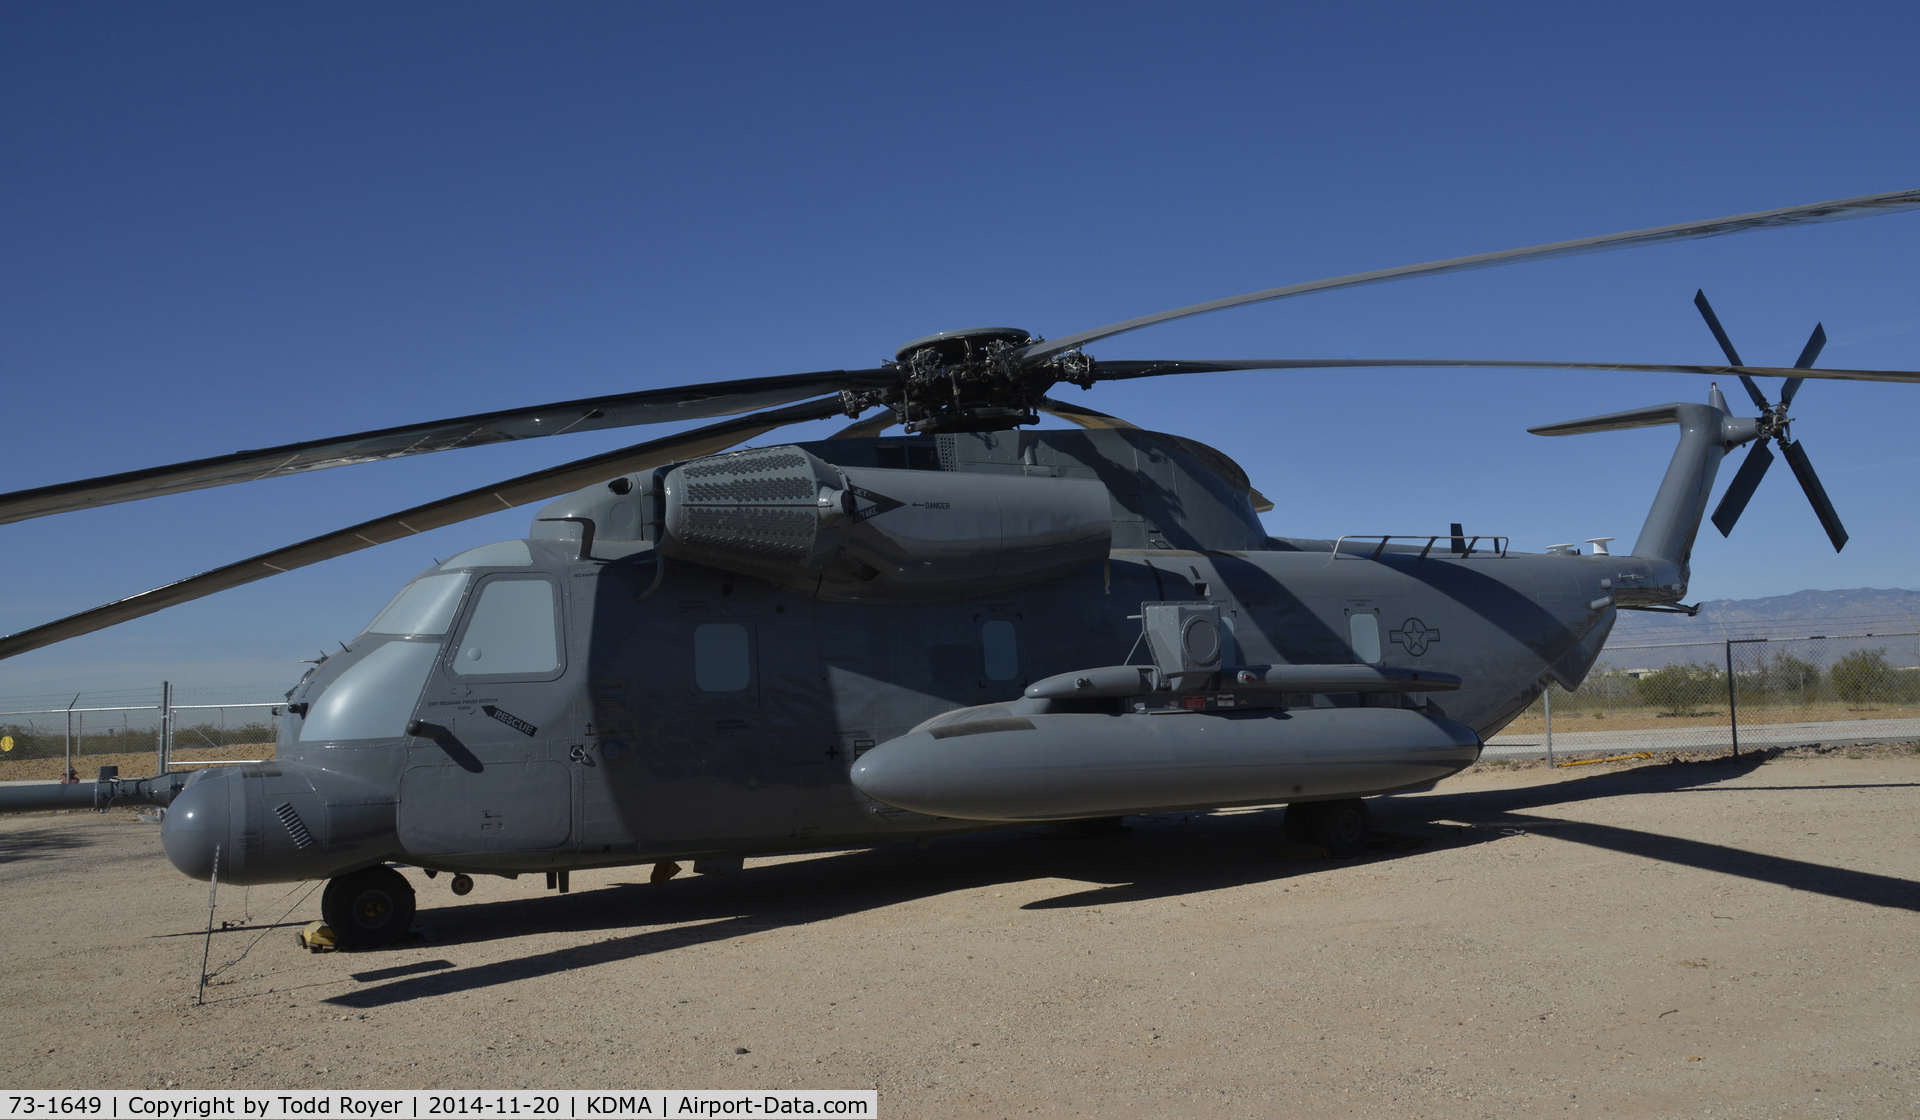 73-1649, Sikorsky MH-53J Pave Low III C/N 65-387, On display at the Pima Air and Space Museum